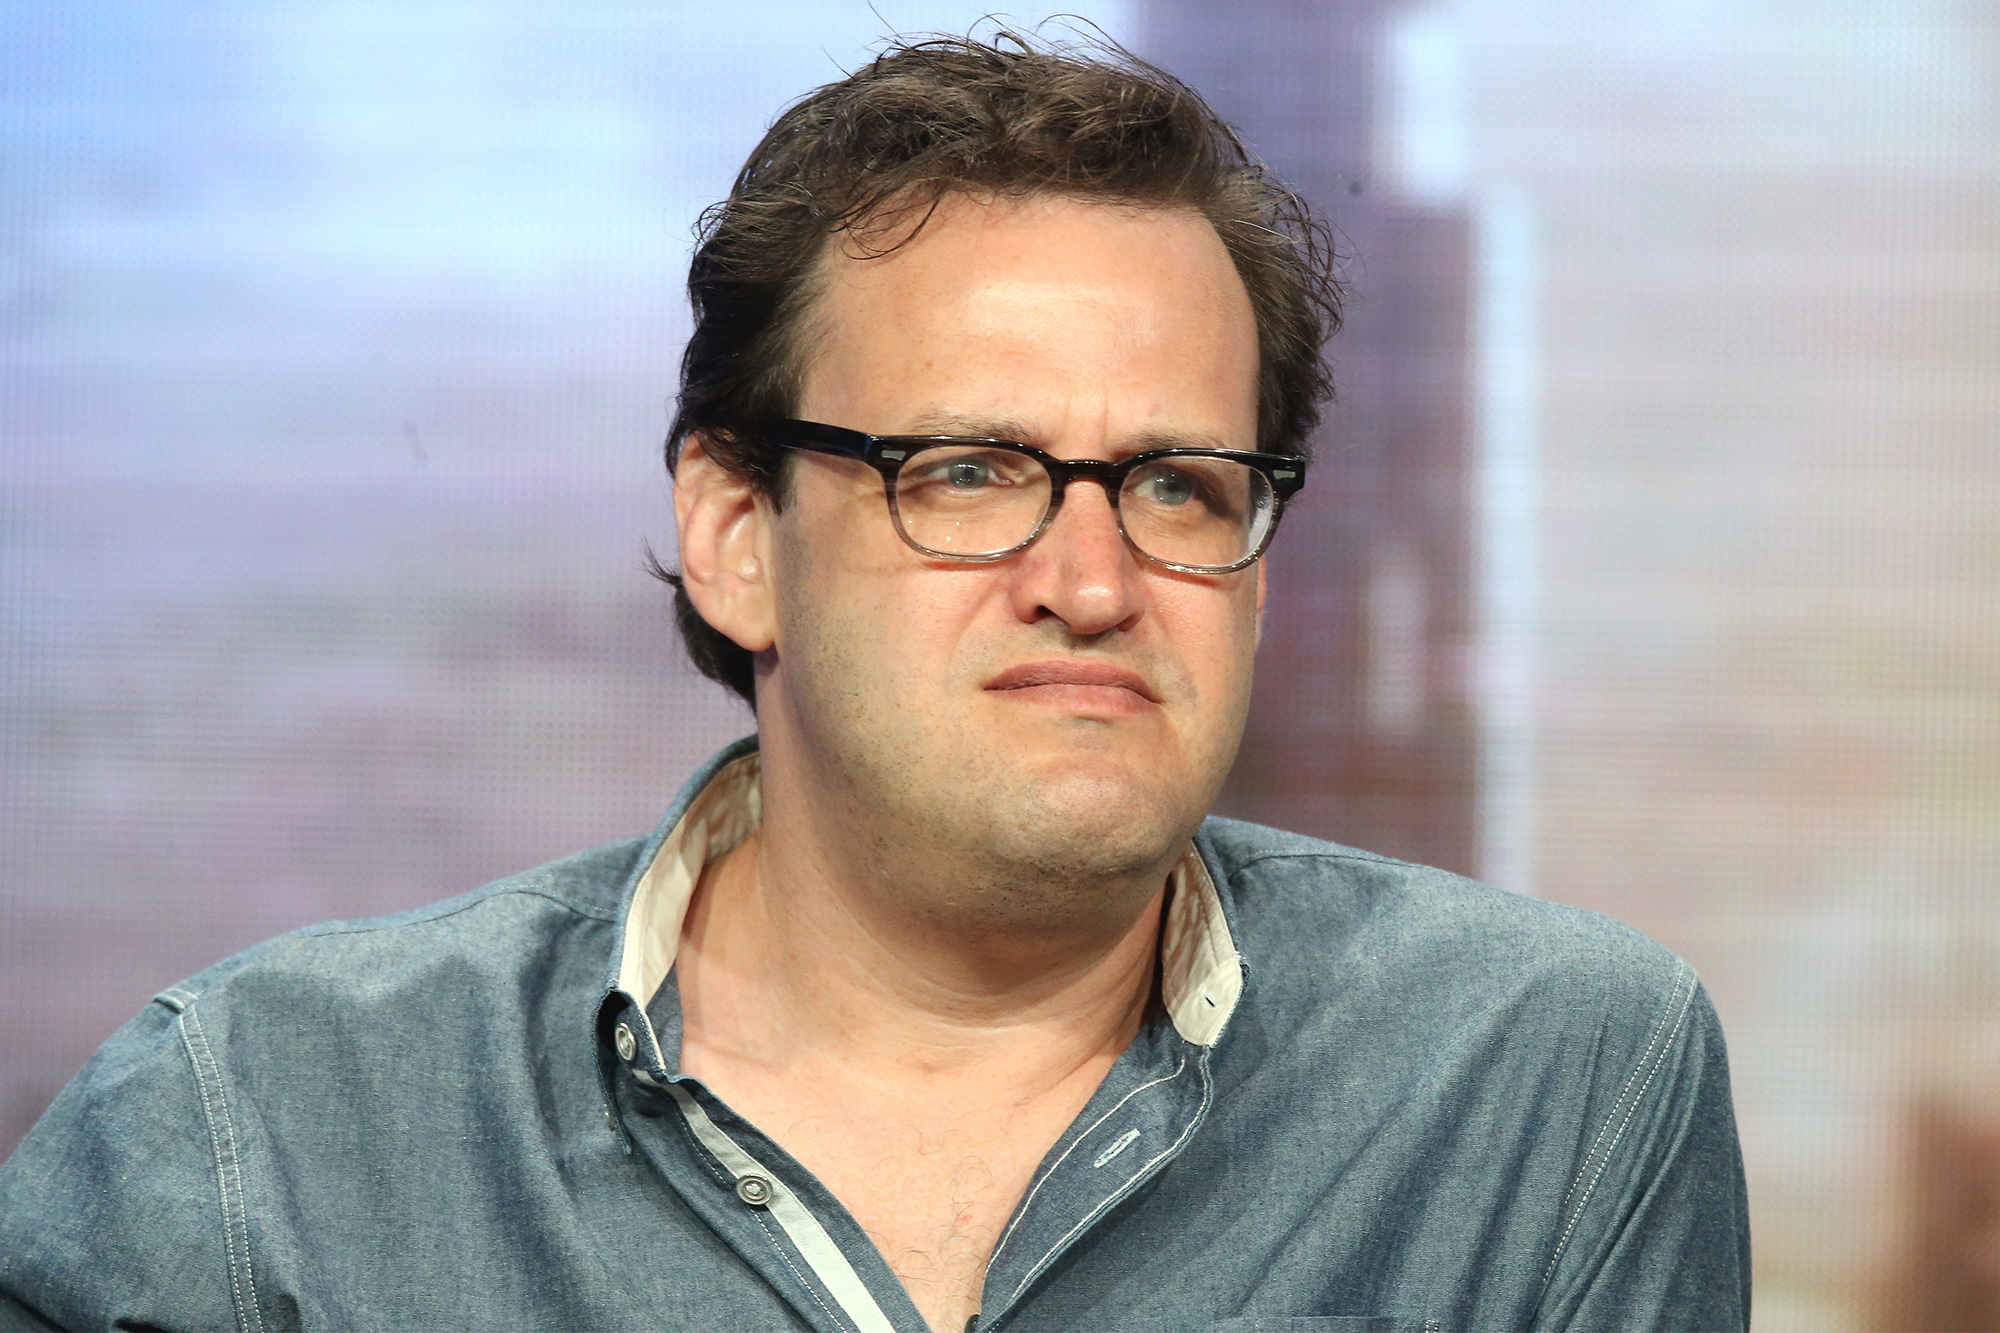 Executive producer Andrew Kreisberg speaks onstage at the 'What's Next for "Supergirl," "The Flash," "Arrow" and "DC's Legends of Tomorrow": The Executive Producers' panel discussion during The CW portion of the 2016 Television Critics Association Summer Tour at The Beverly Hilton Hotel on August 11, 2016 in Beverly Hills, California.